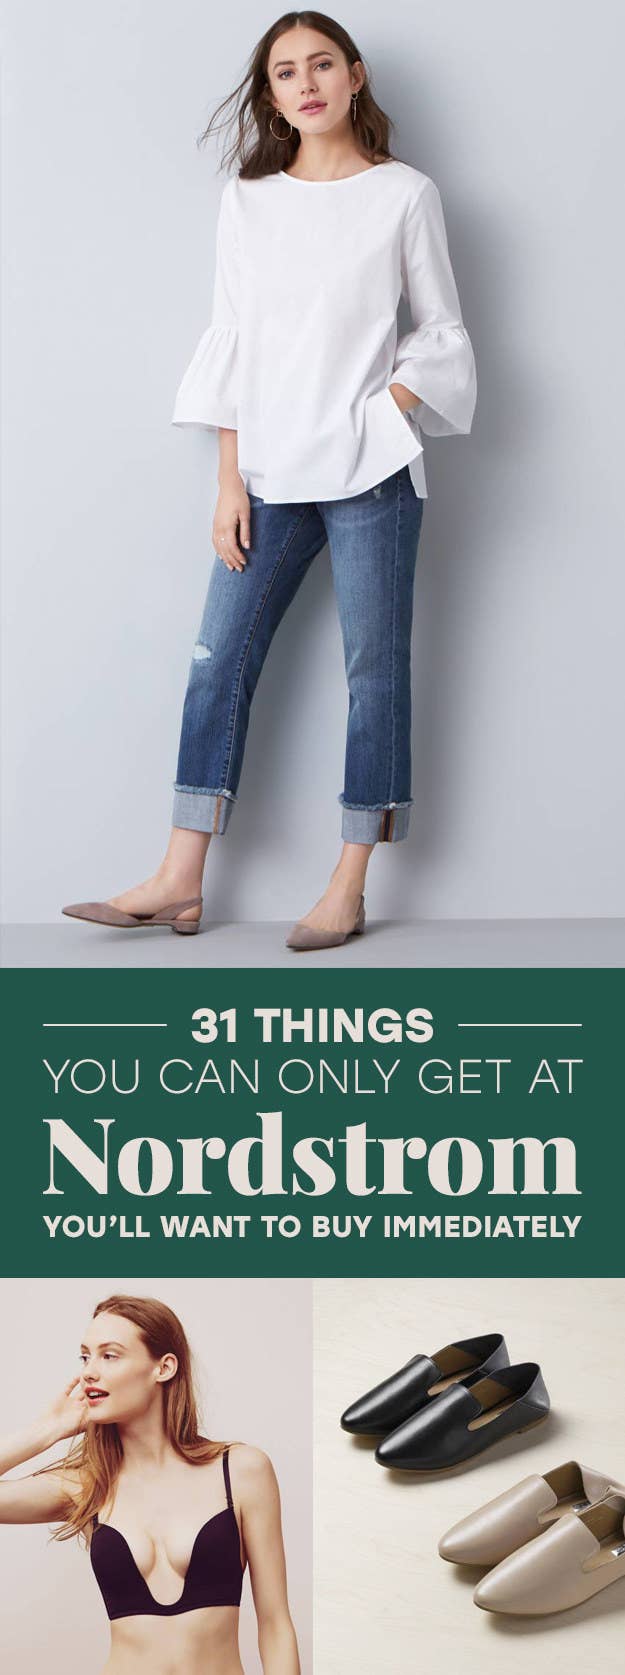 31 Ridiculously Awesome Things You Can Only Get At Nordstrom